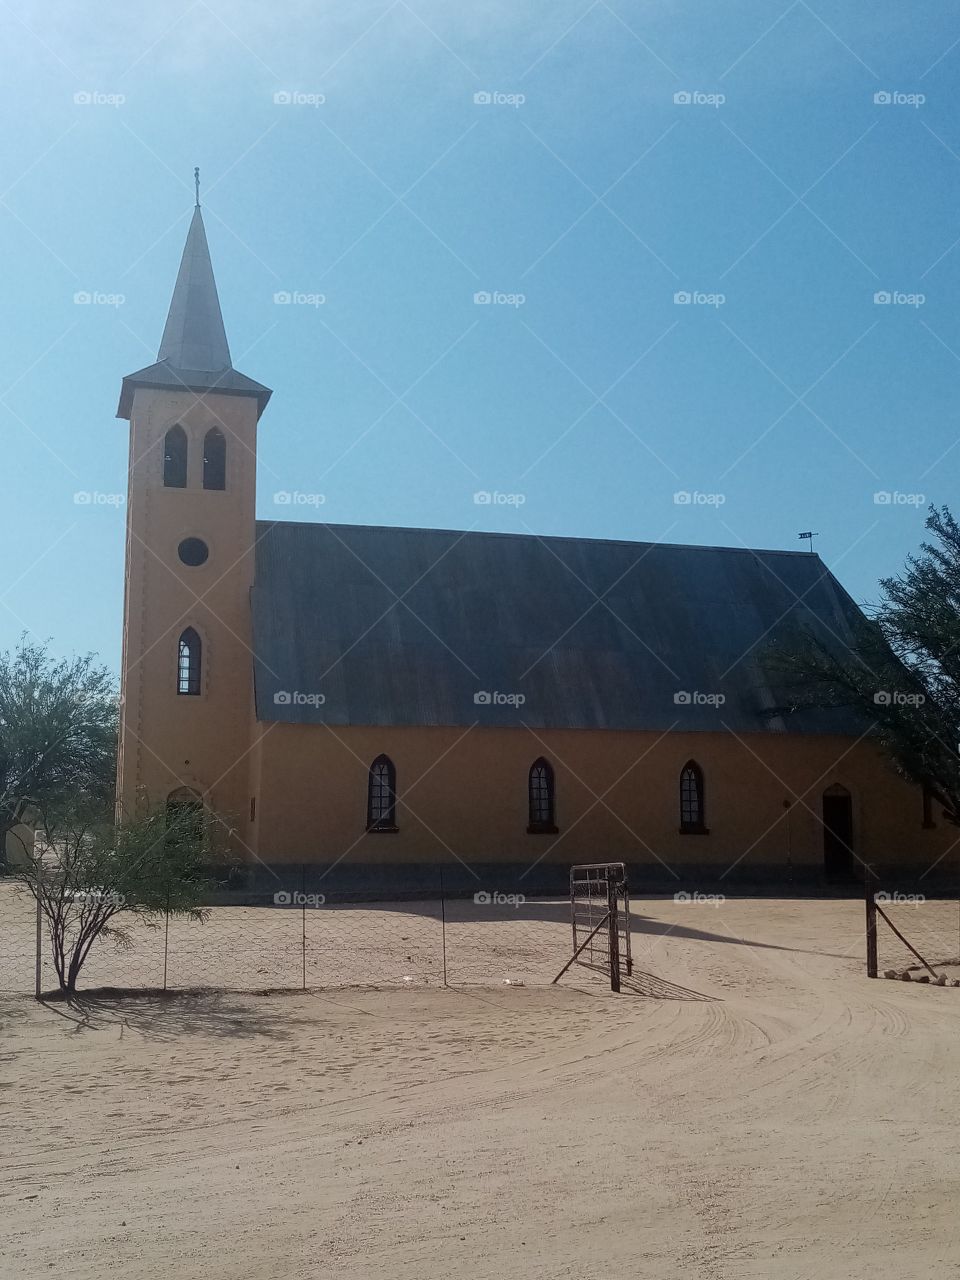 First church build by the missionaries
In Namibia when it was a German colony